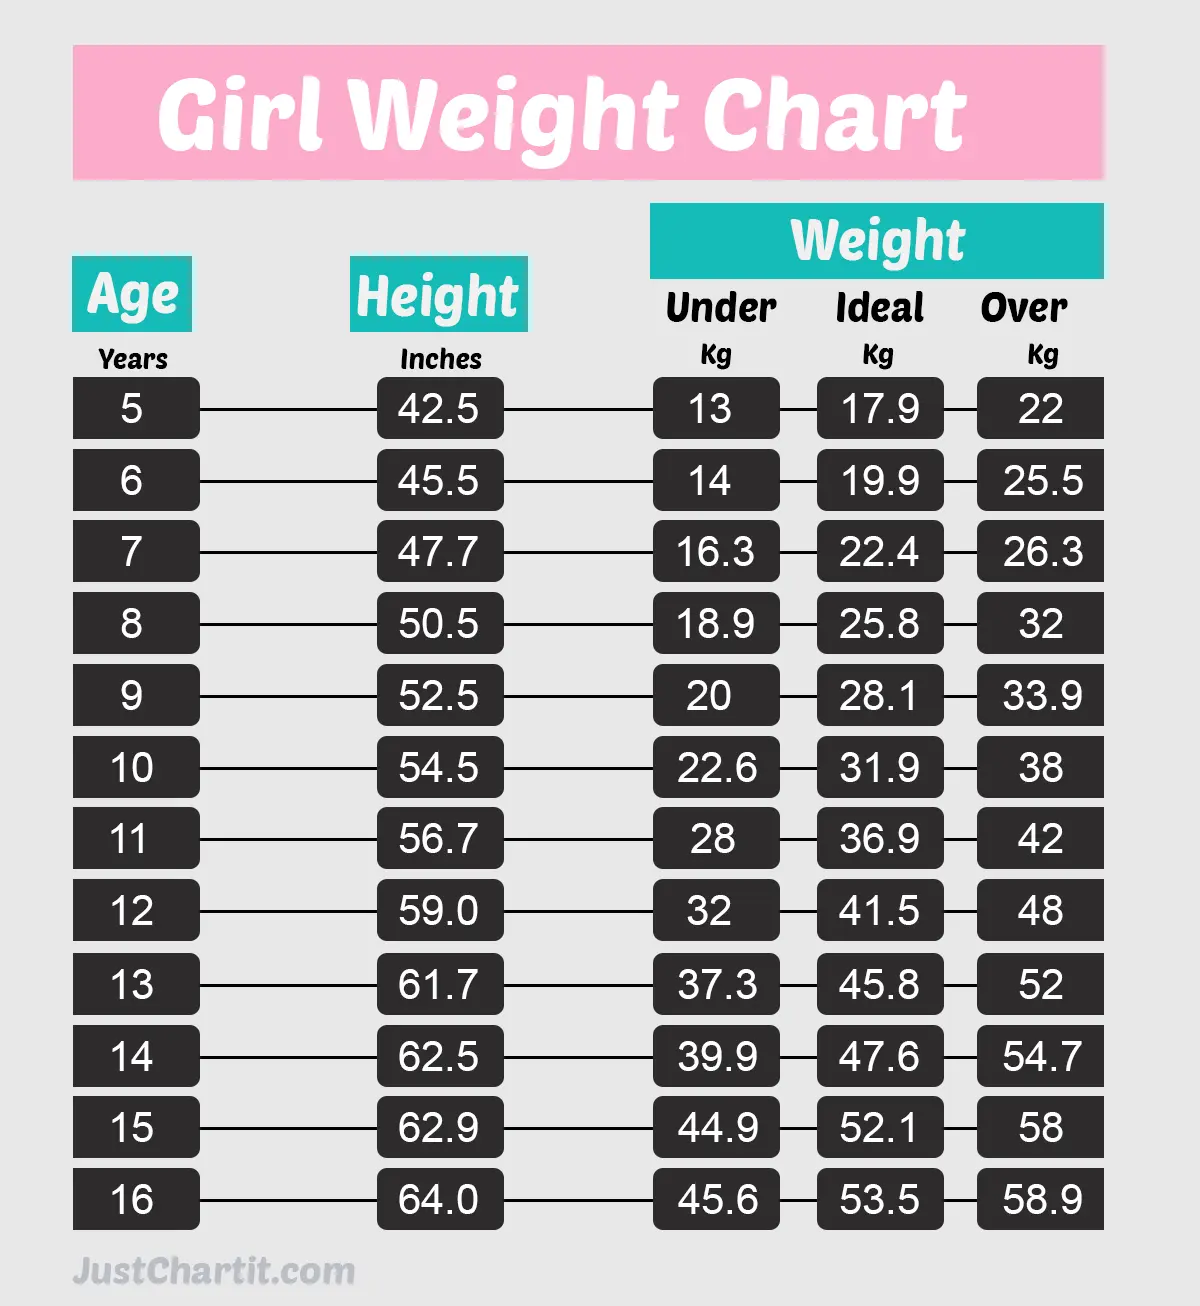 What Is The Normal Weight For A 16 Year Old